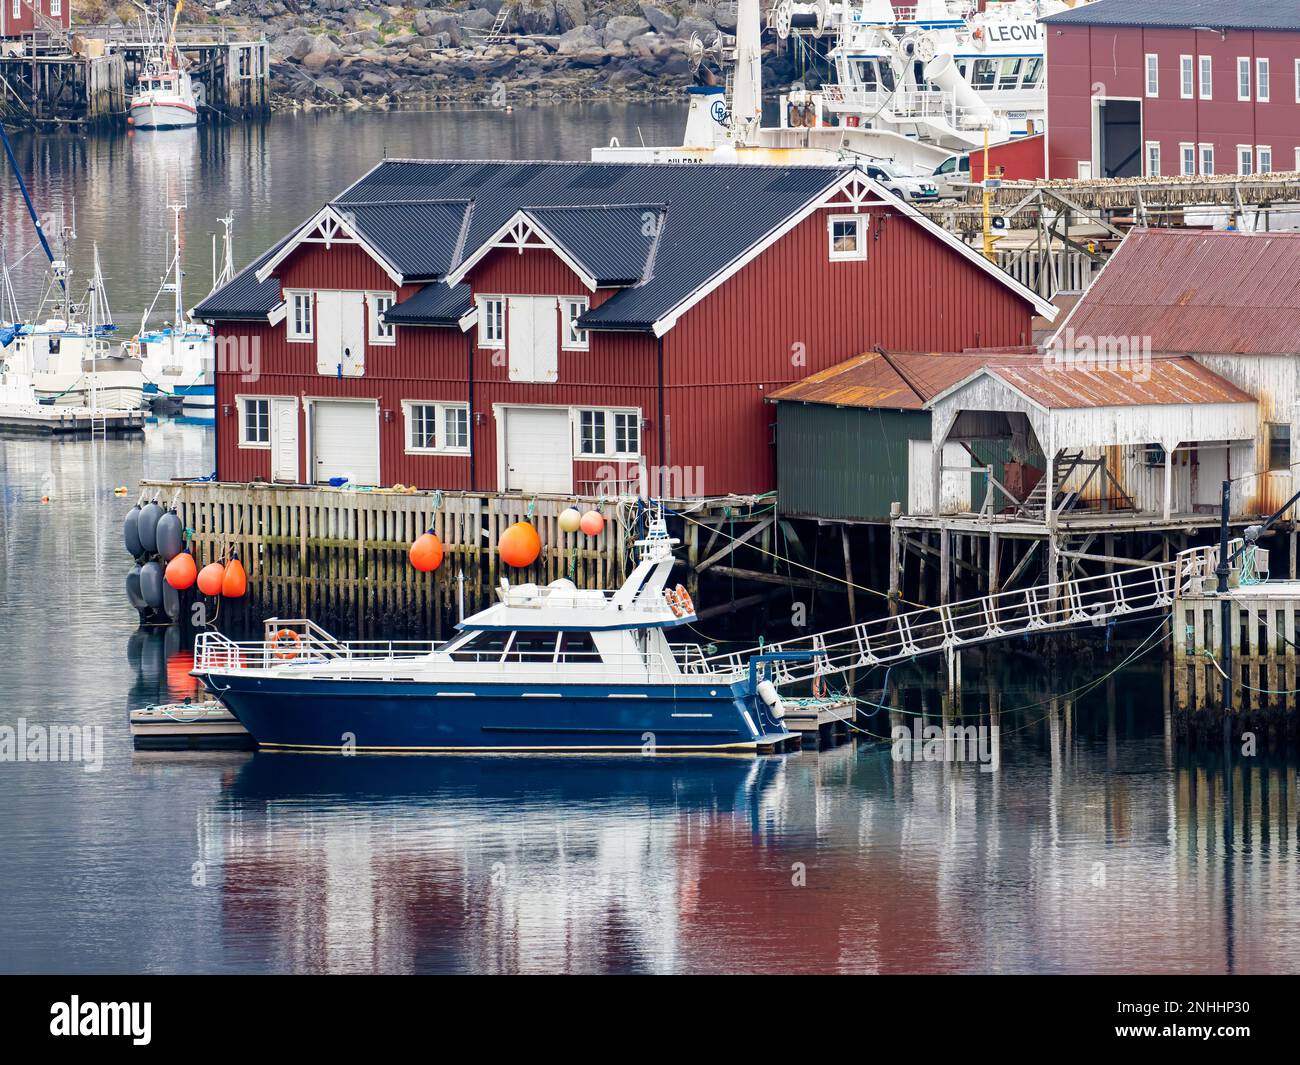 A view of the town of Reine, a fishing village on Moskenesøya in the Lofoten archipelago, Norway. Stock Photo